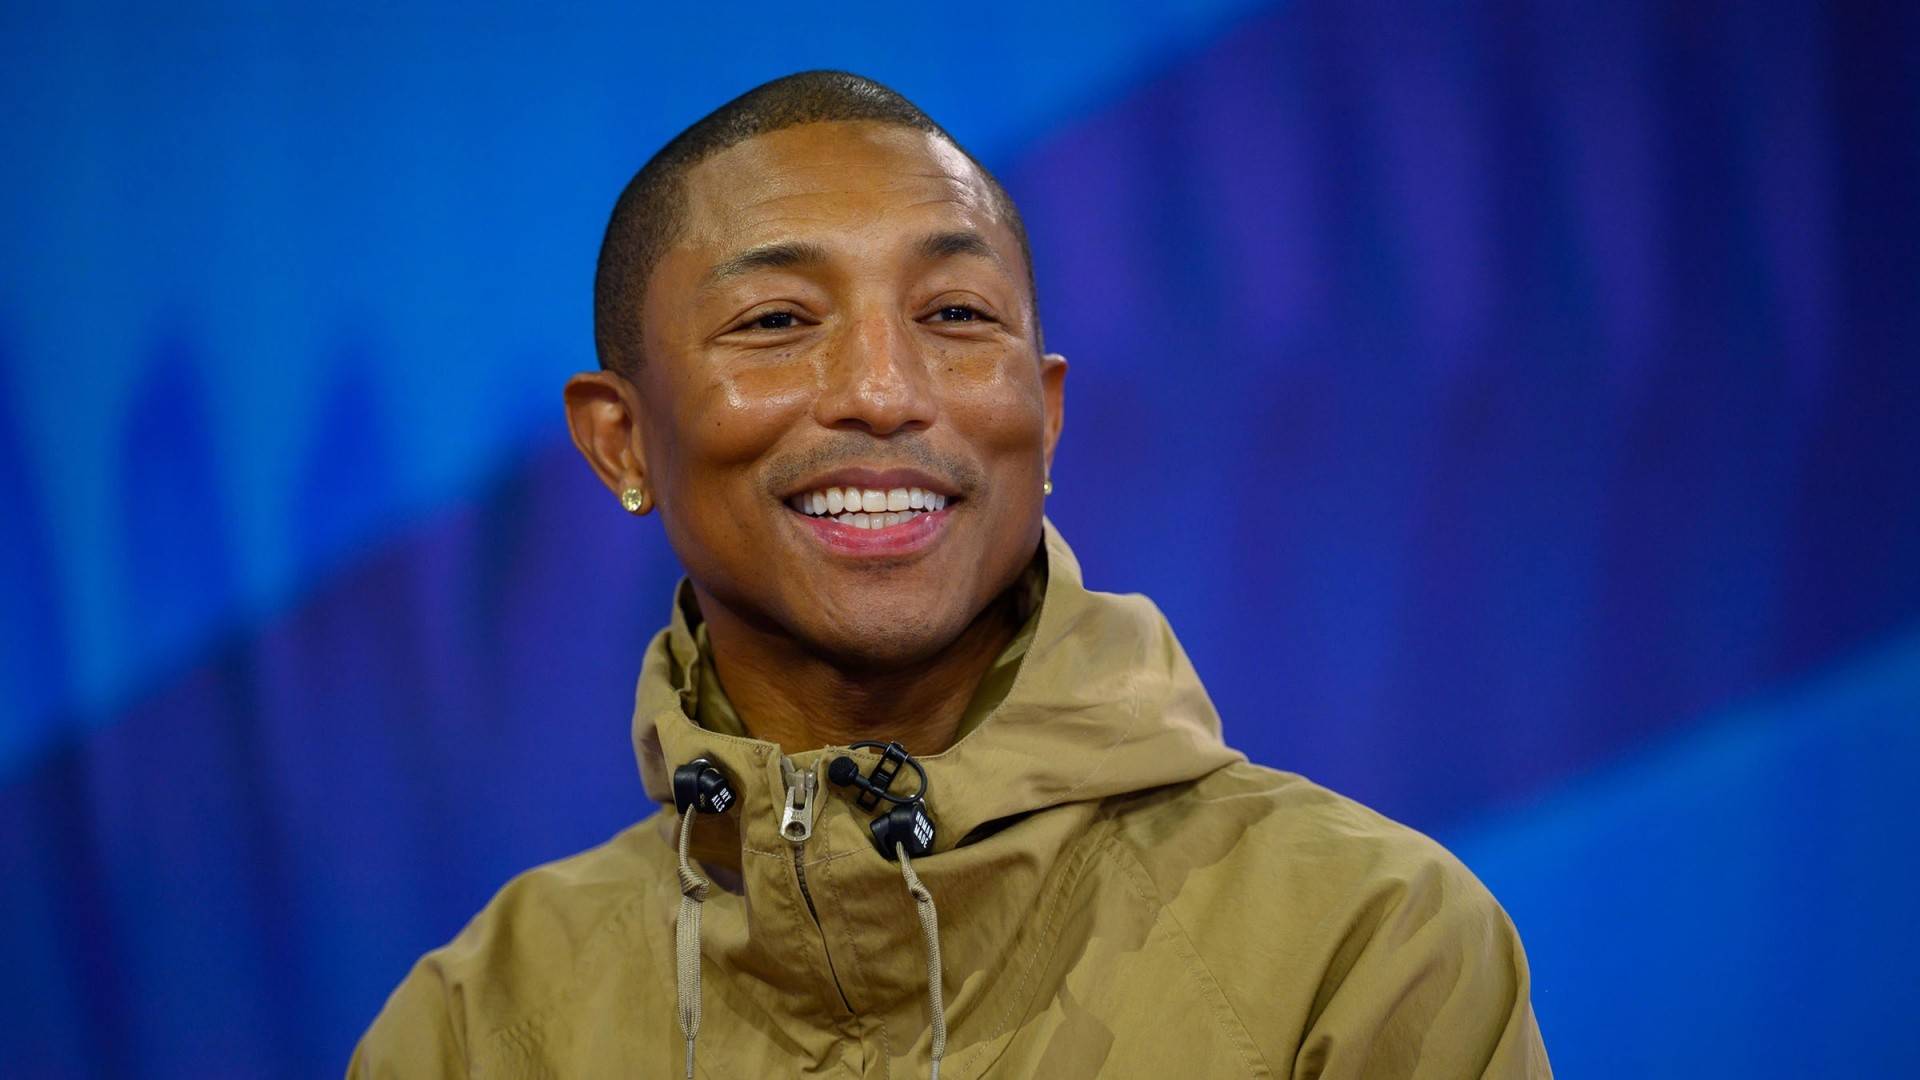 Family Goals! Pharrell Williams Shares Cool Photos Of His Wife And Son  Rocket On Their Trip To Egypt - (Video Clip)